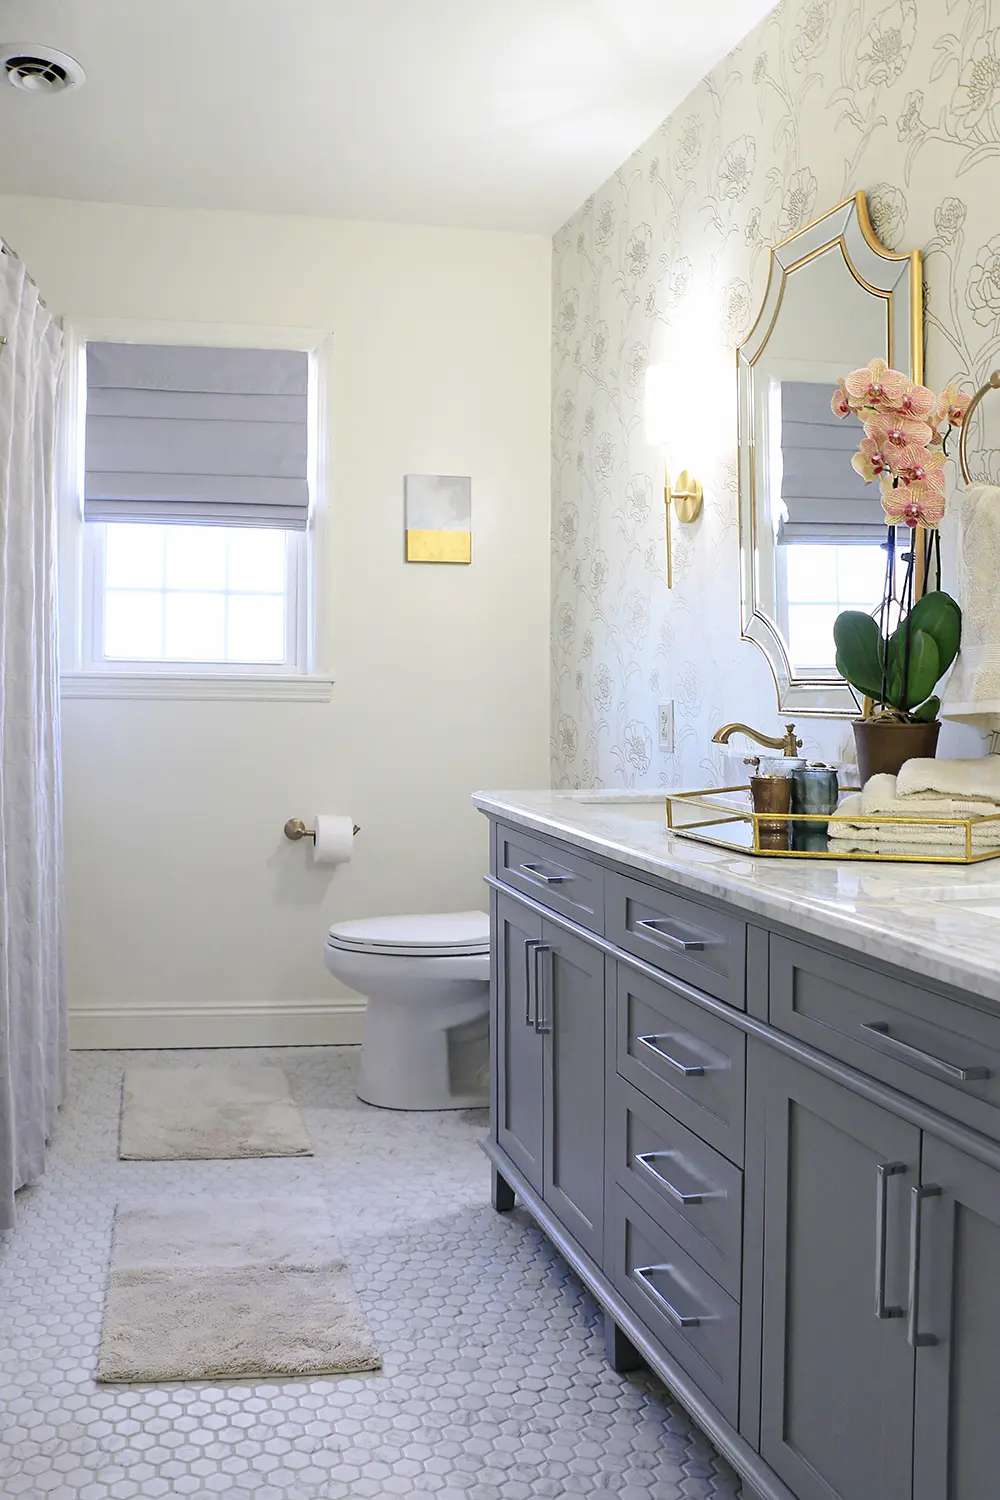 floral bathroom accent wall